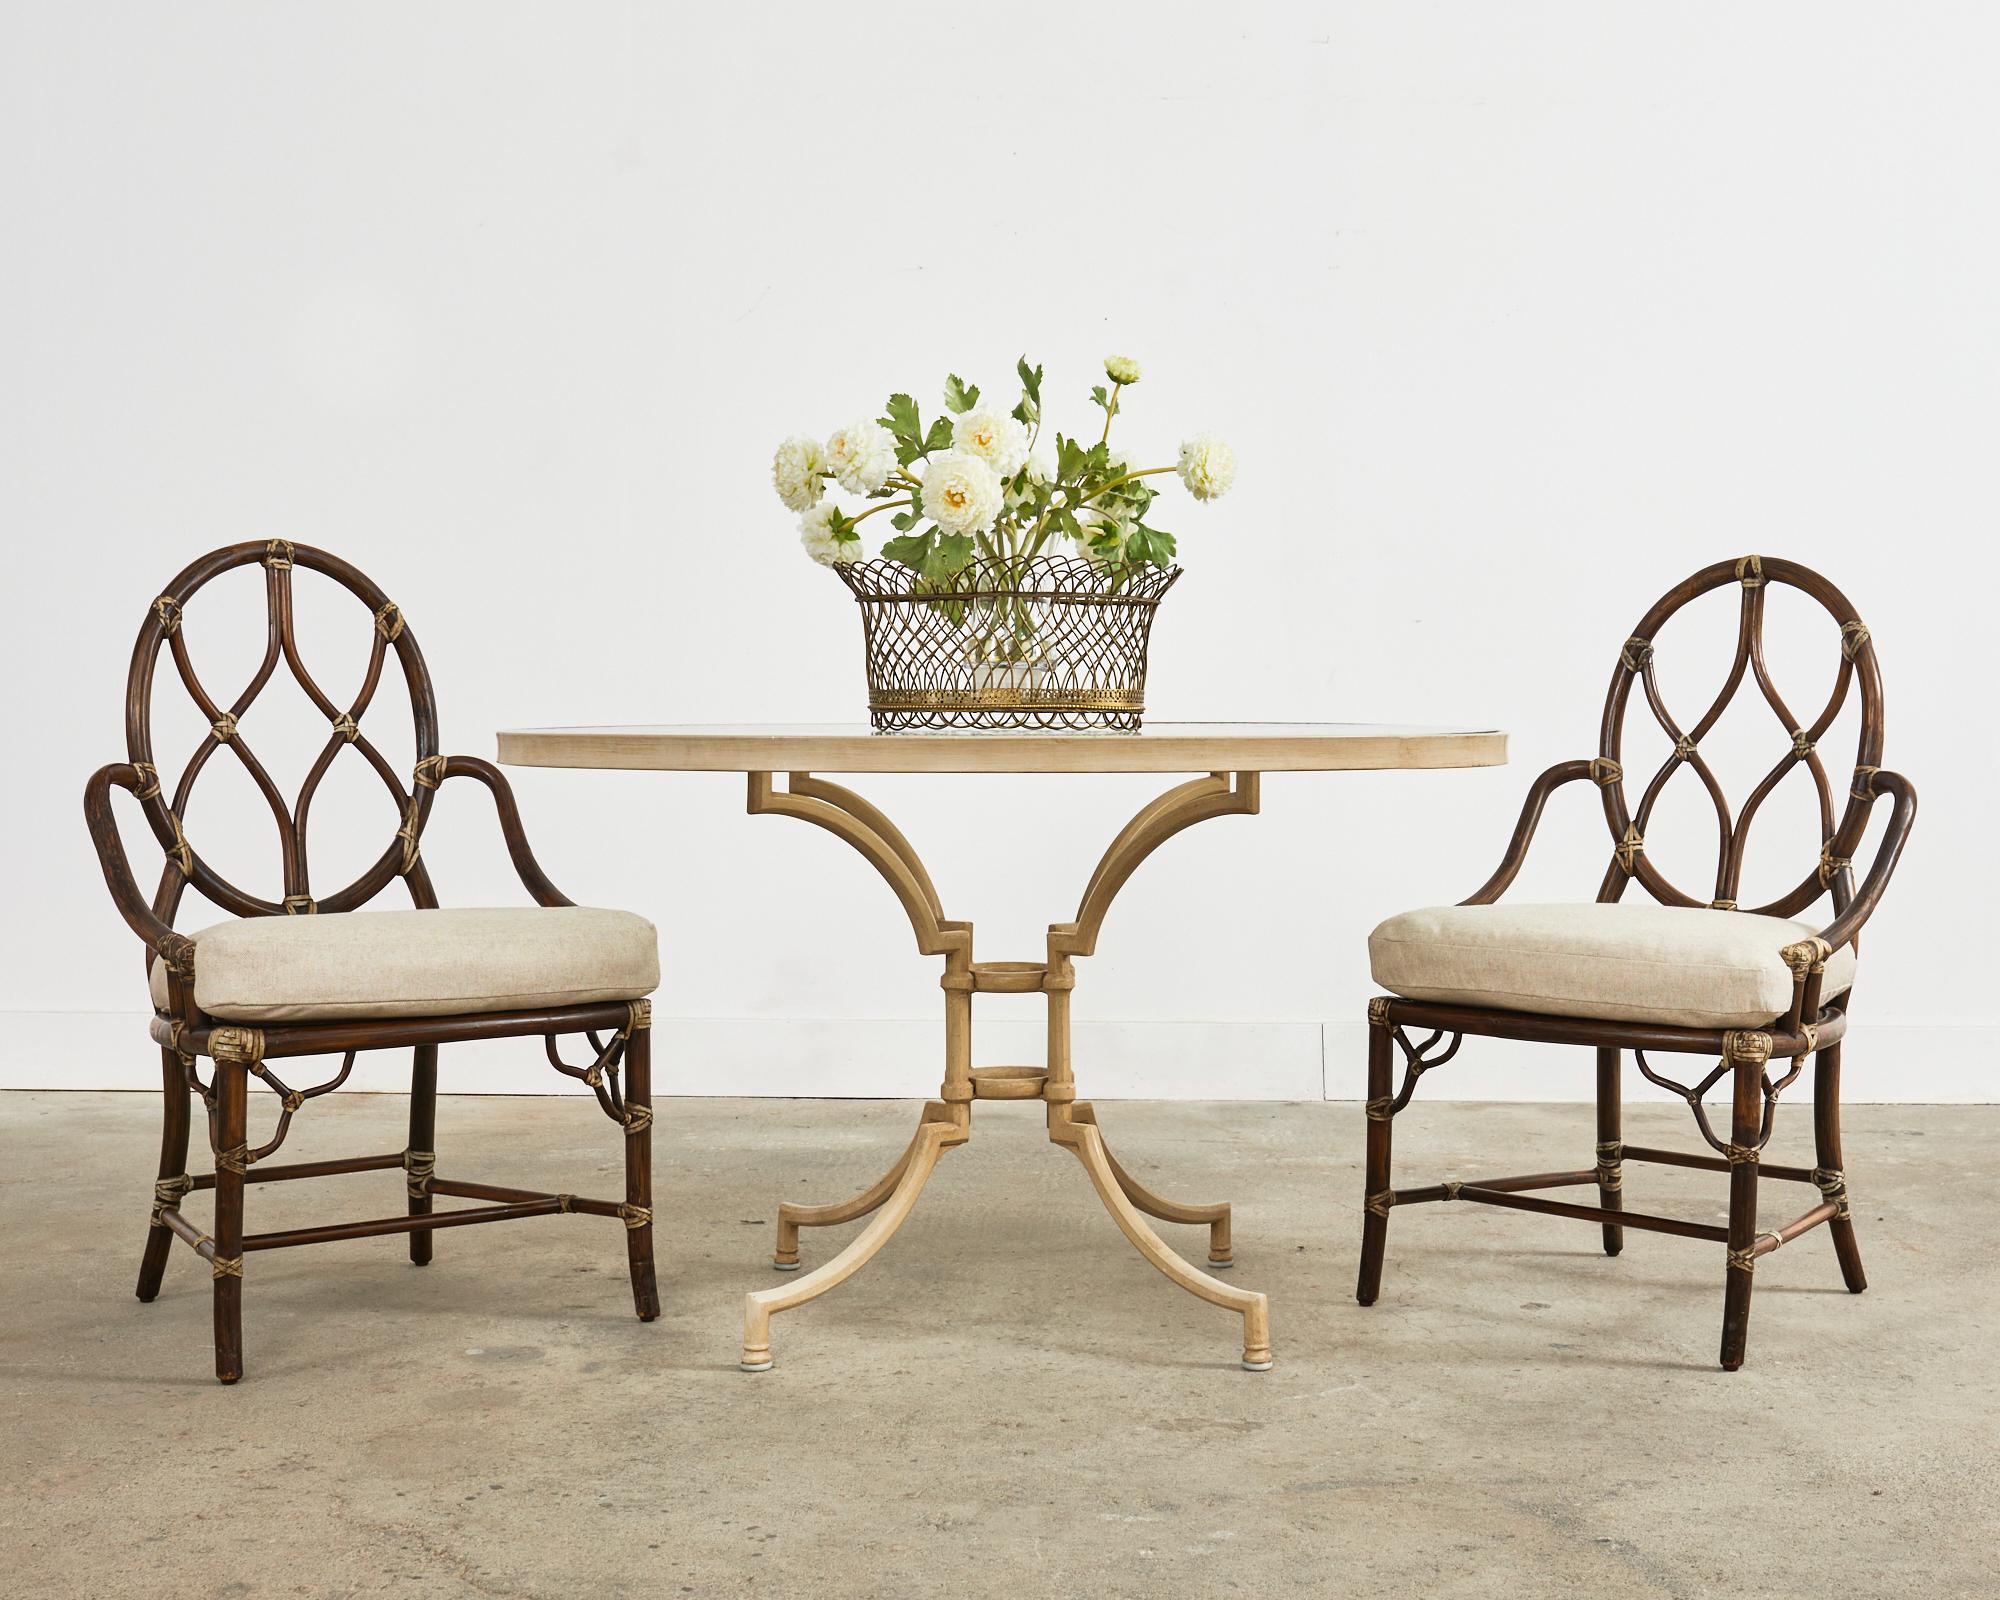 Rare set of eight rattan and cane dining chairs featuring a cameo back with graceful x form designs. Made in the California coastal organic modern style by McGuire San Francisco, CA. The frames have an intentionally aged, distressed patina on the